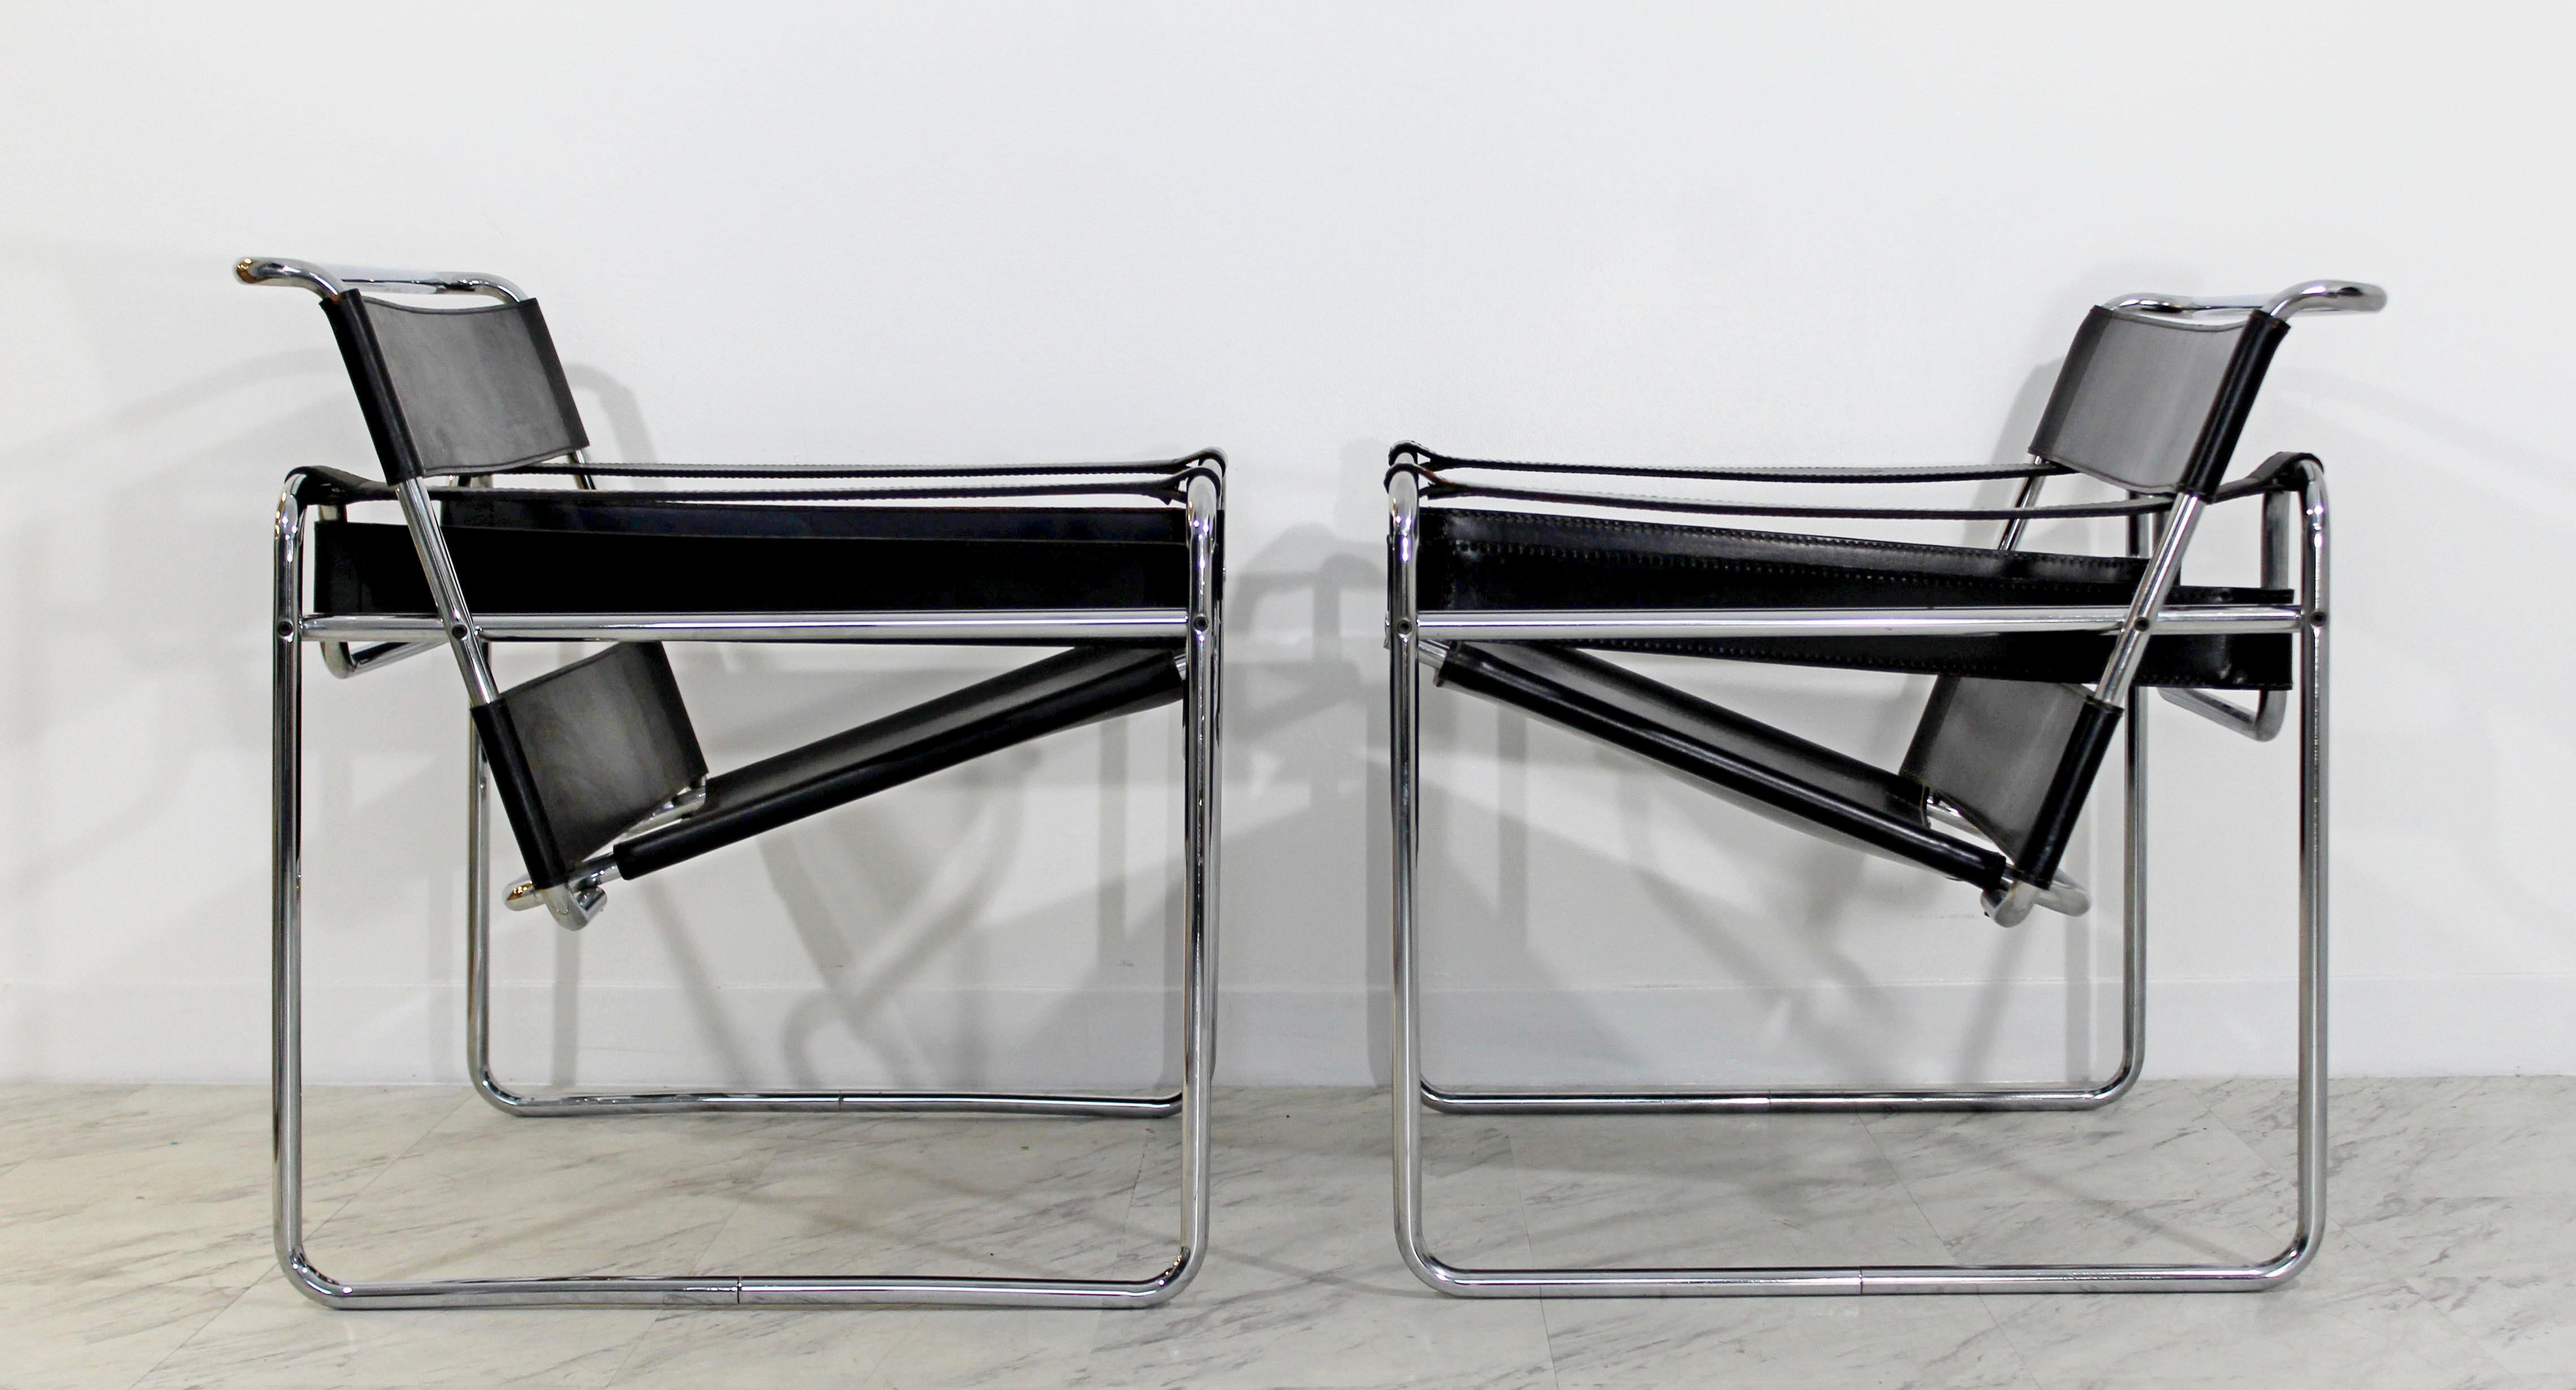 For your consideration is an incredibly pair of Marcel Breuer Wassily armchairs, made of chrome and leather, made in Italy, circa the 1970s. In very good condition. The dimensions are 30.5